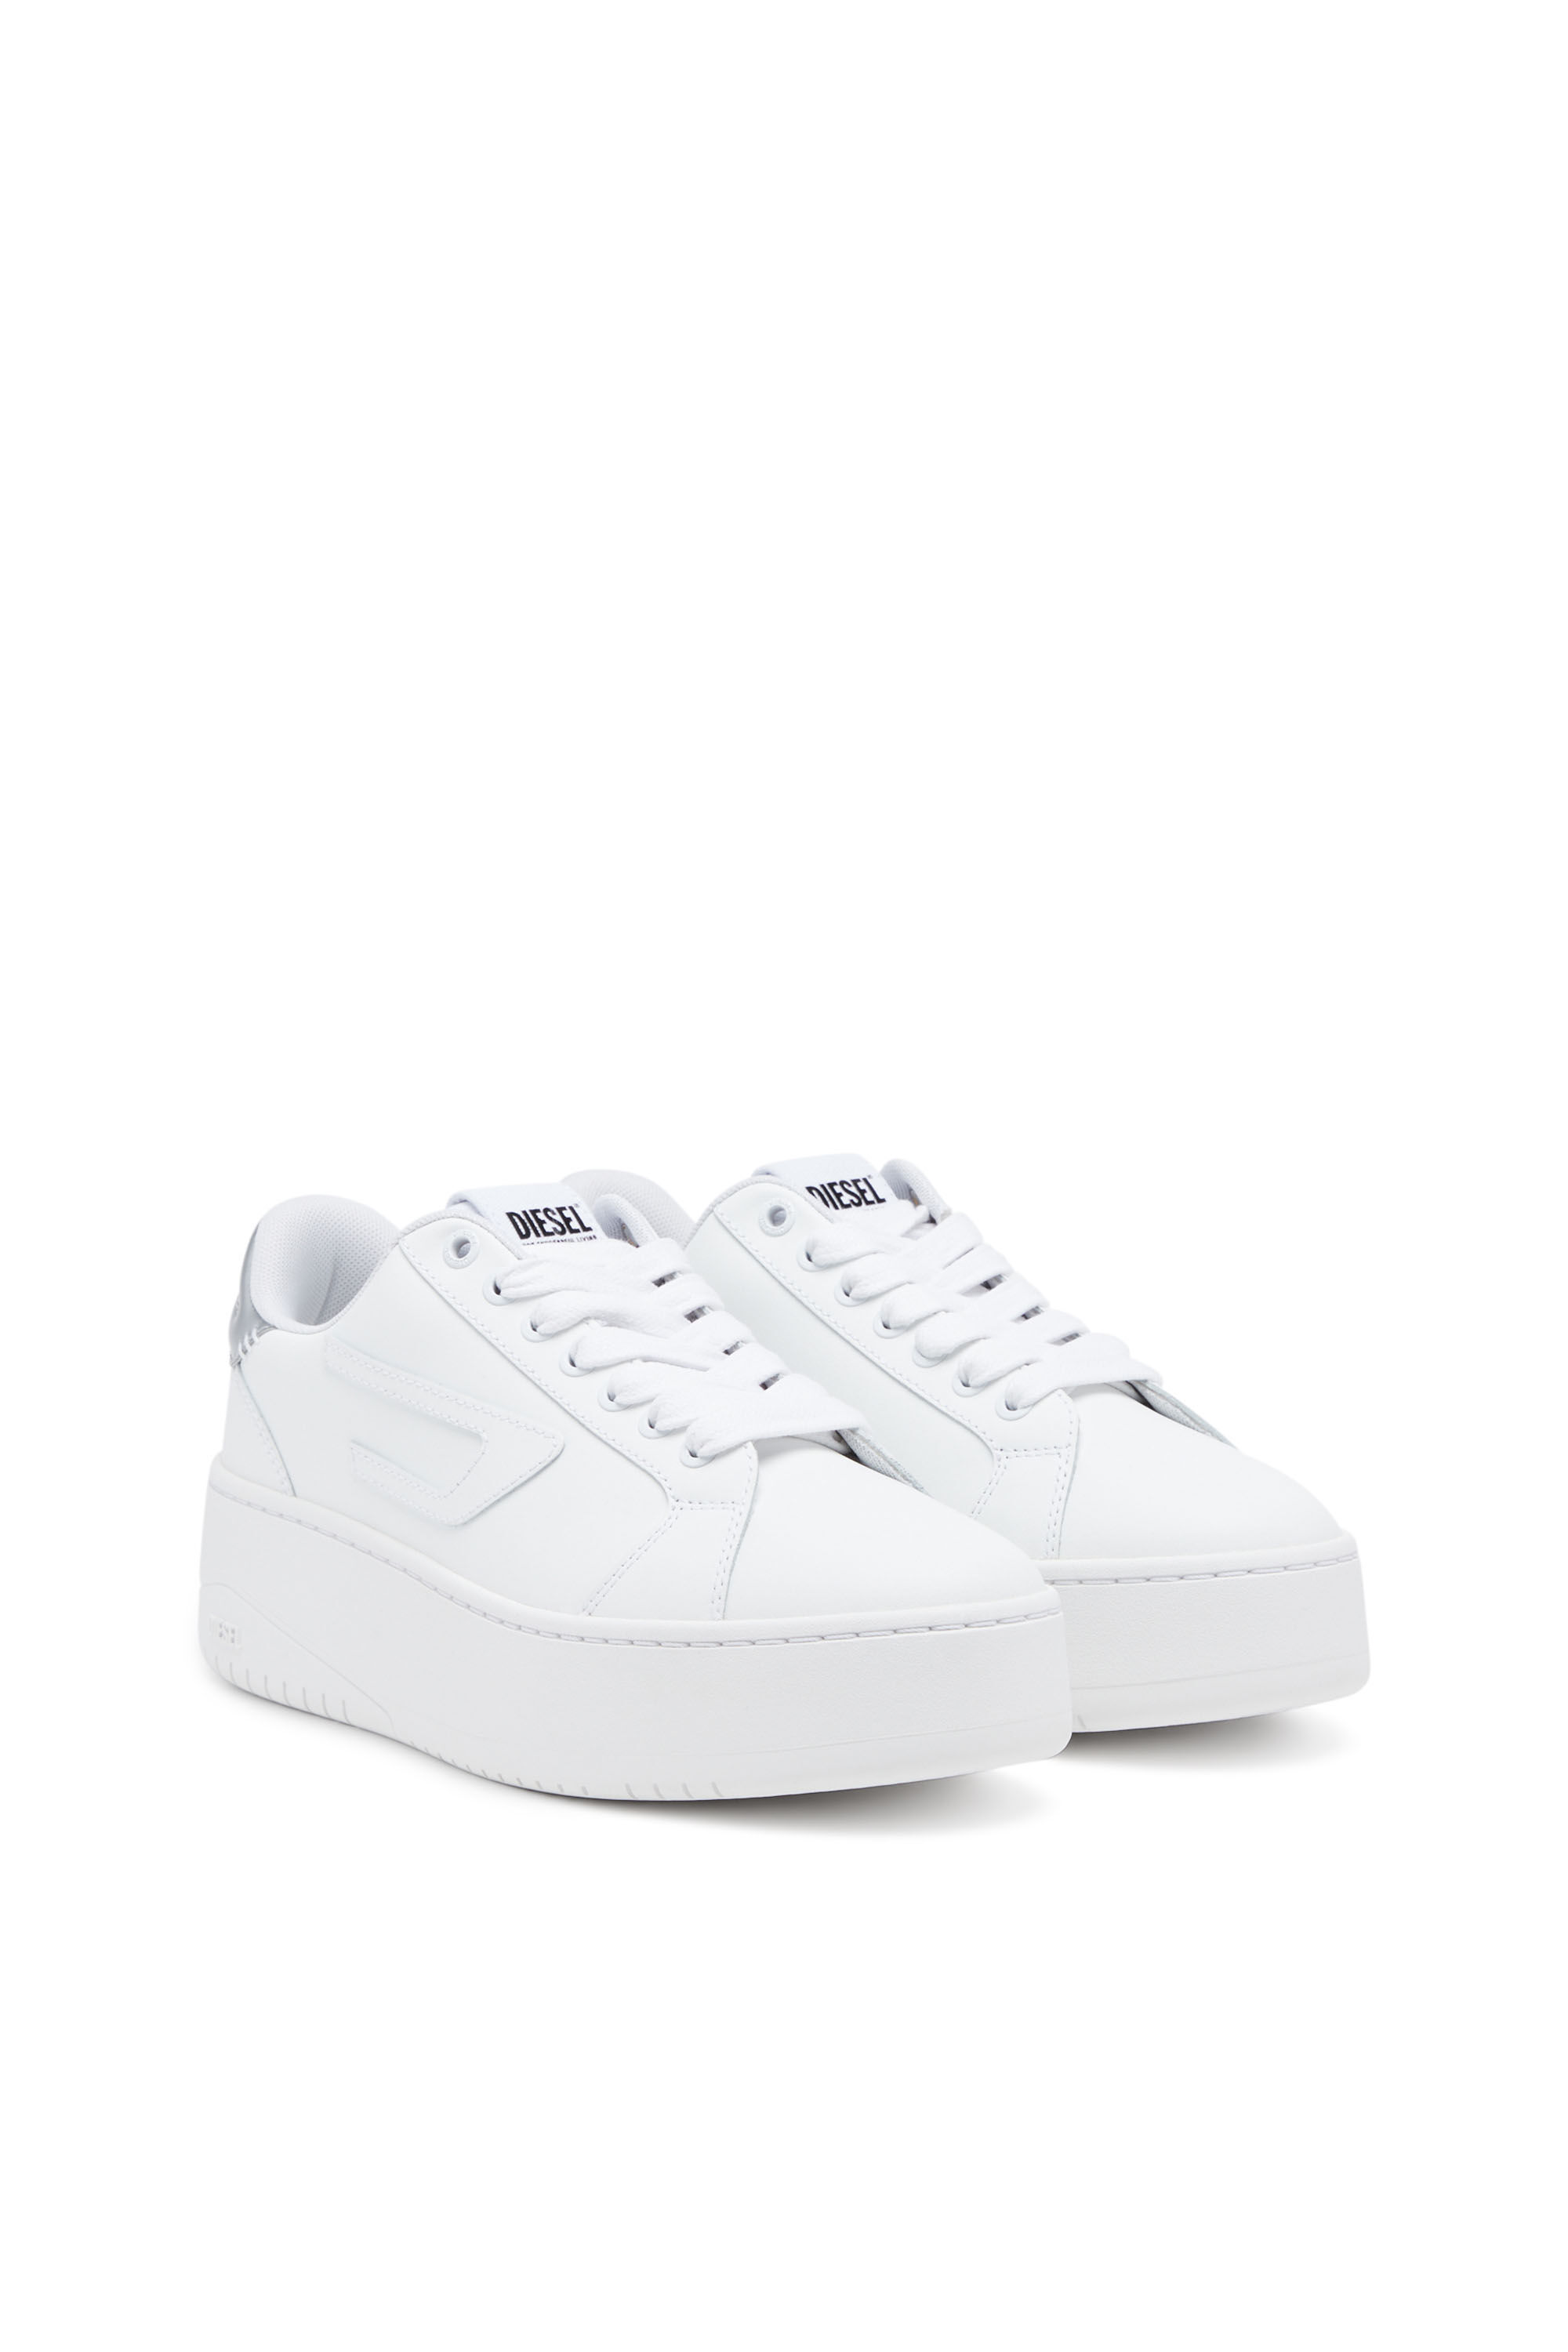 Diesel - S-ATHENE BOLD W, Woman S-Athene Bold-Low-top sneakers with flatform sole in White - Image 2